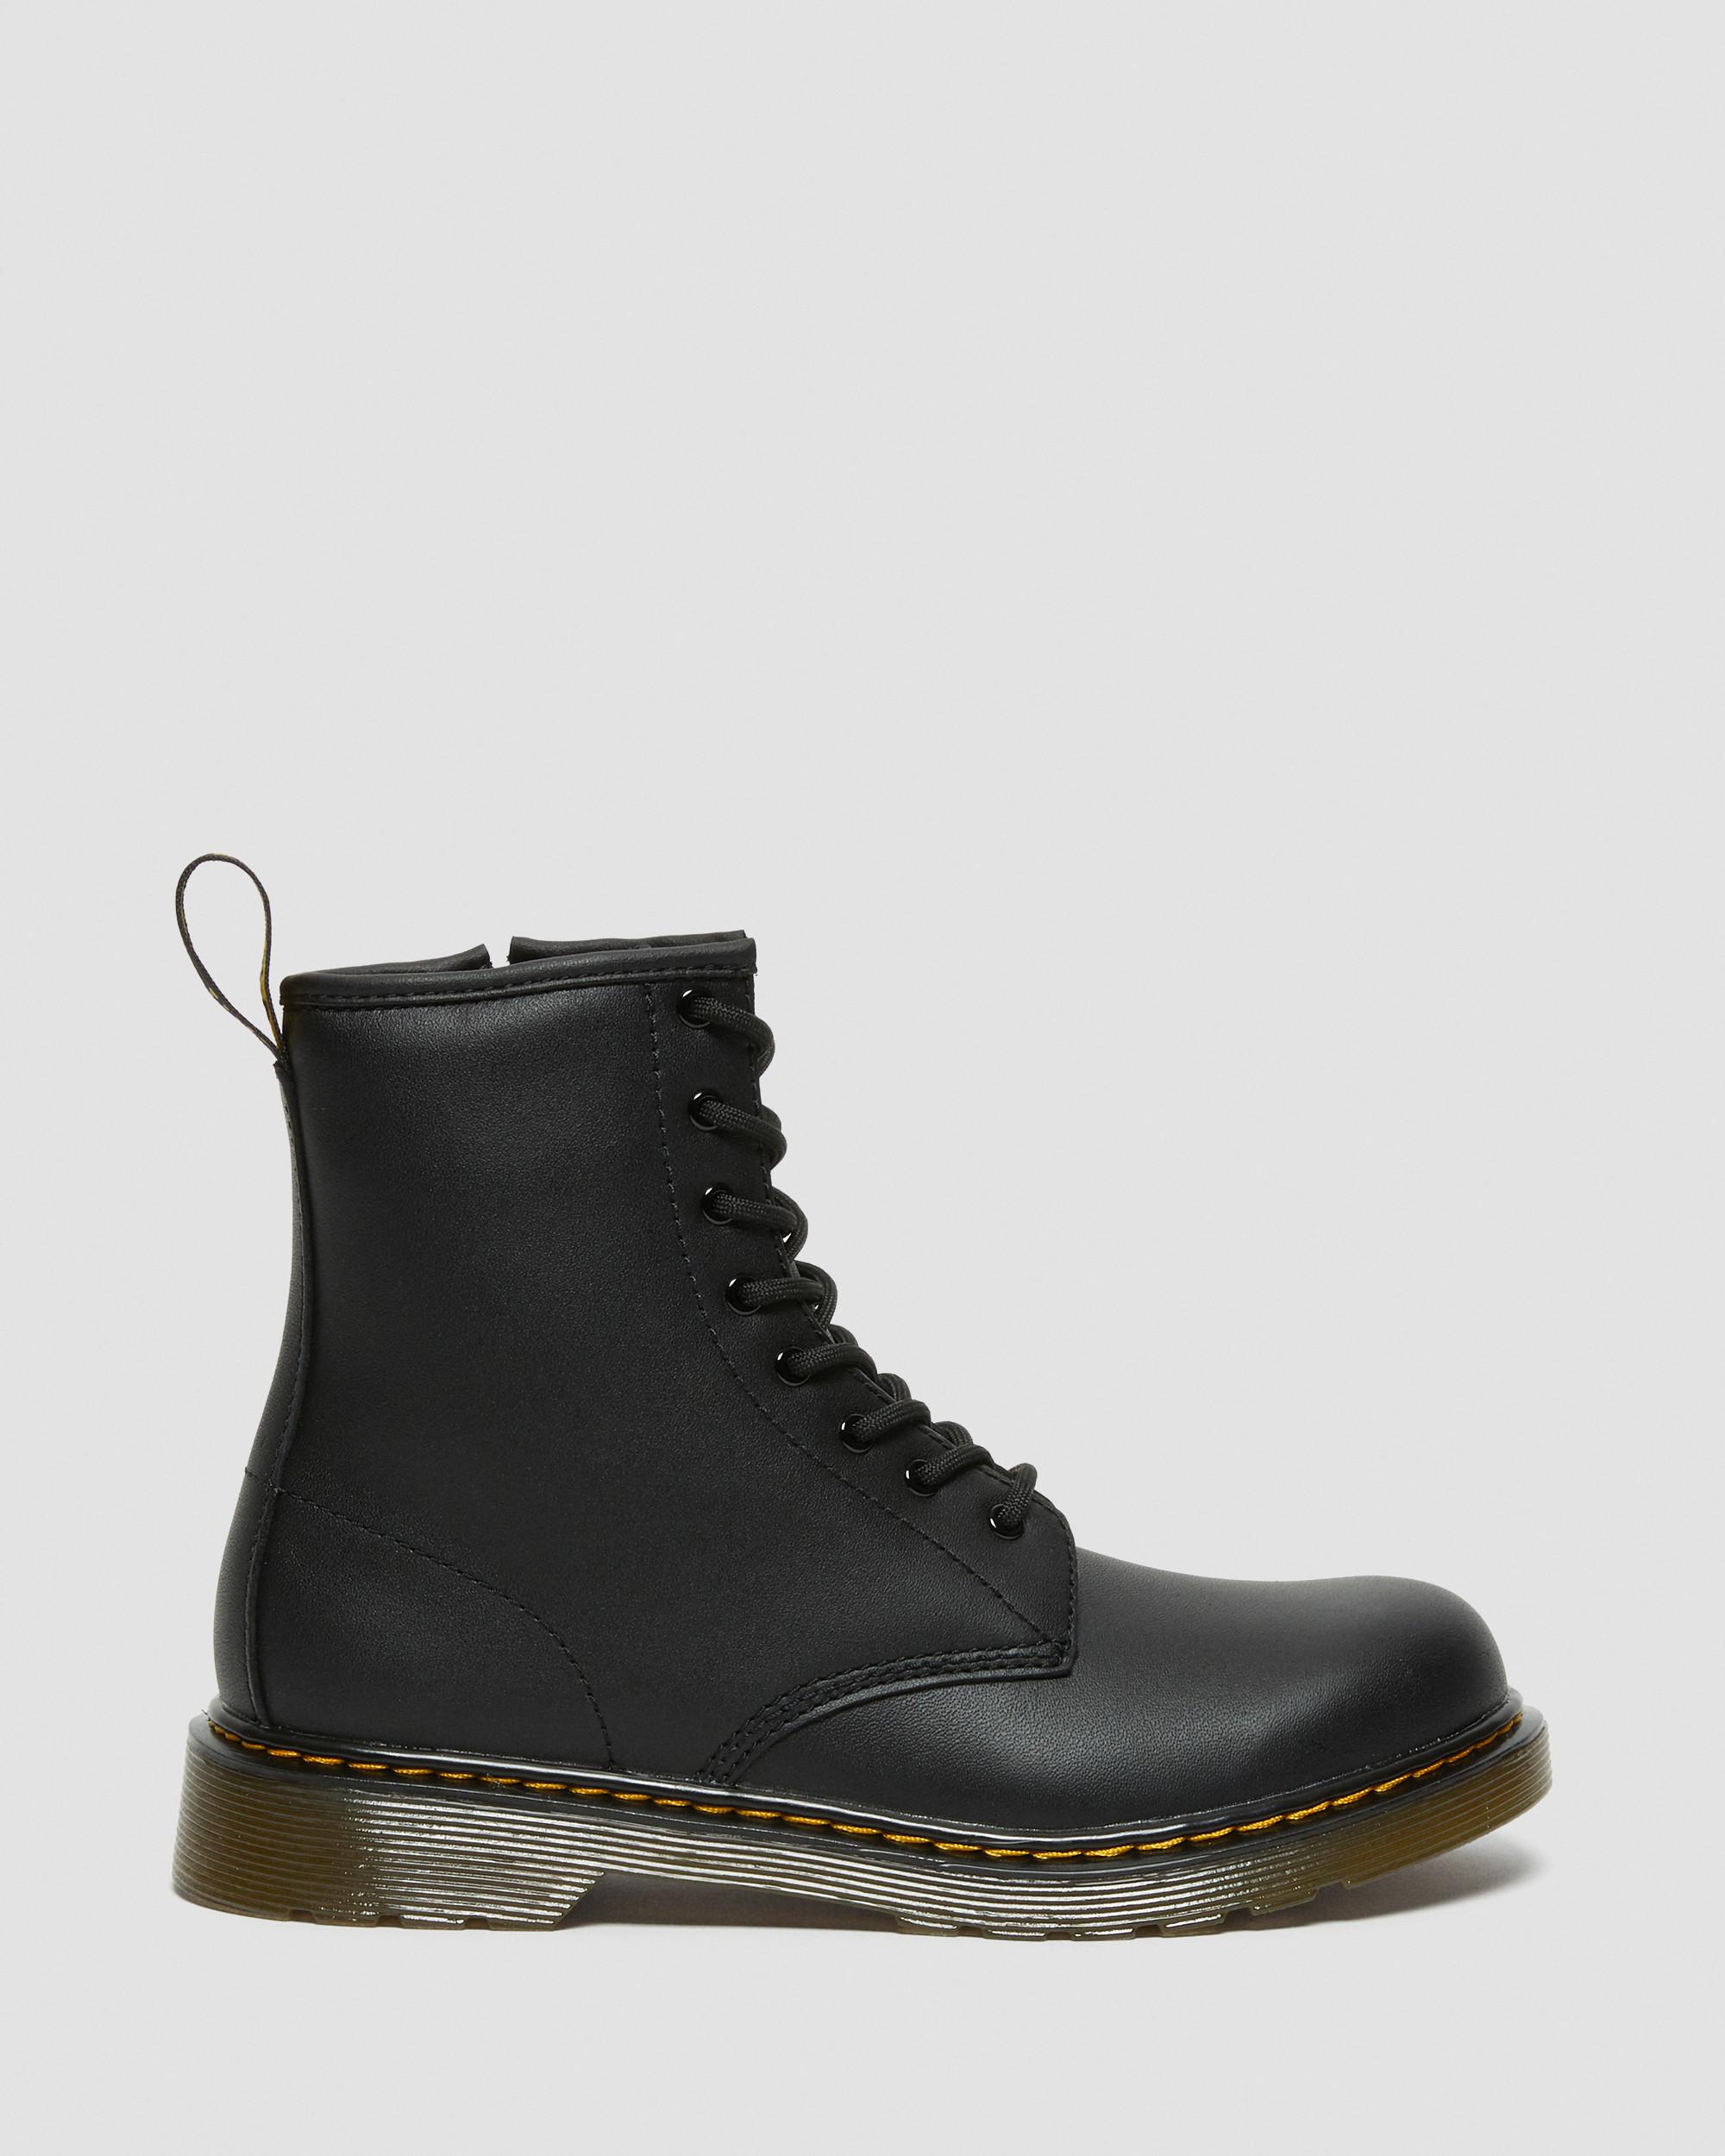 Youth 1460 Softy | in Martens Boots Dr. T Black Lace Up Leather